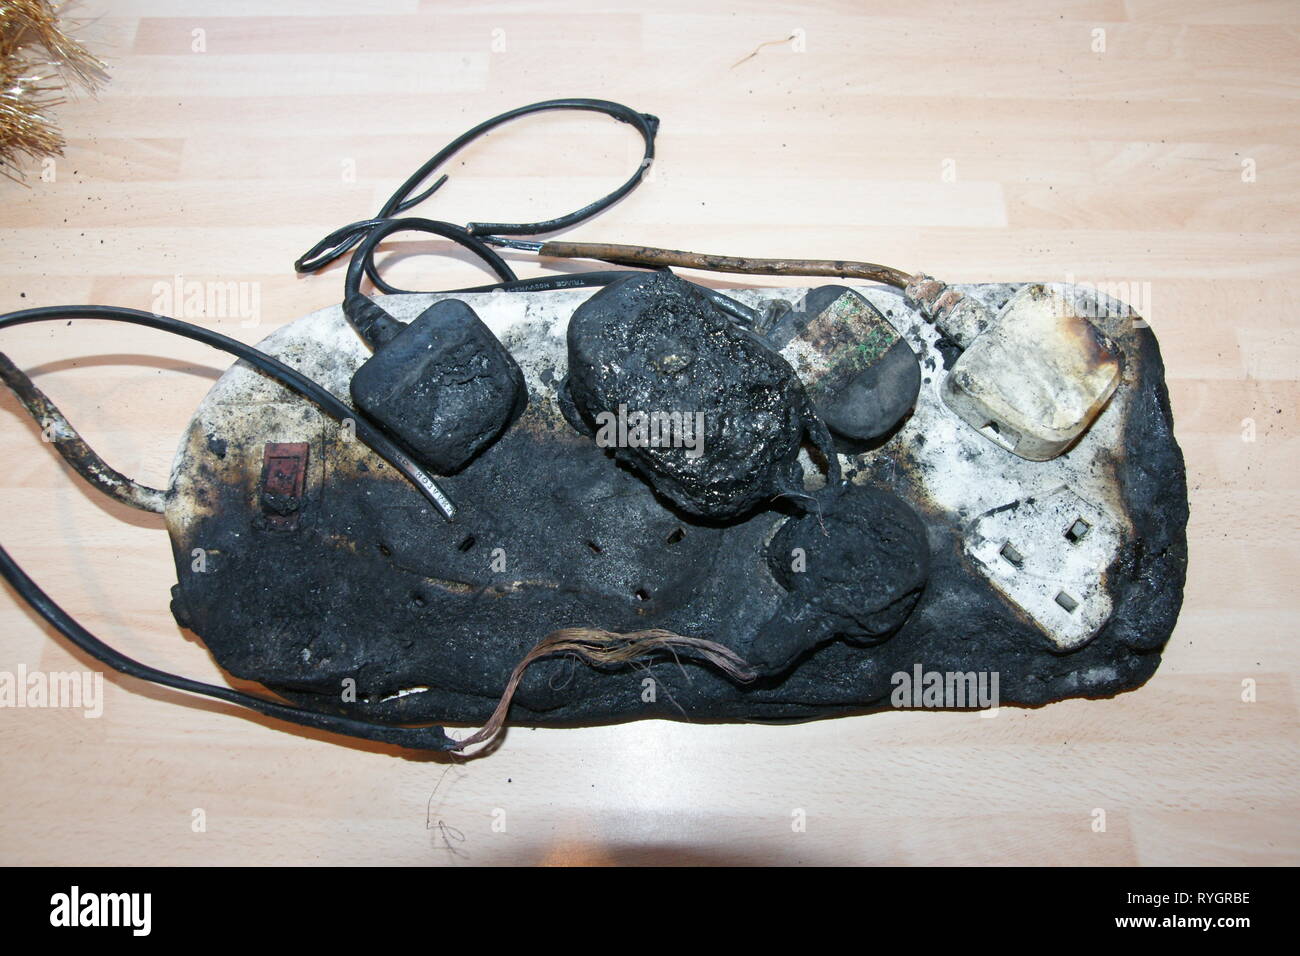 overloaded socket, domestic house fire electrical fire Stock Photo